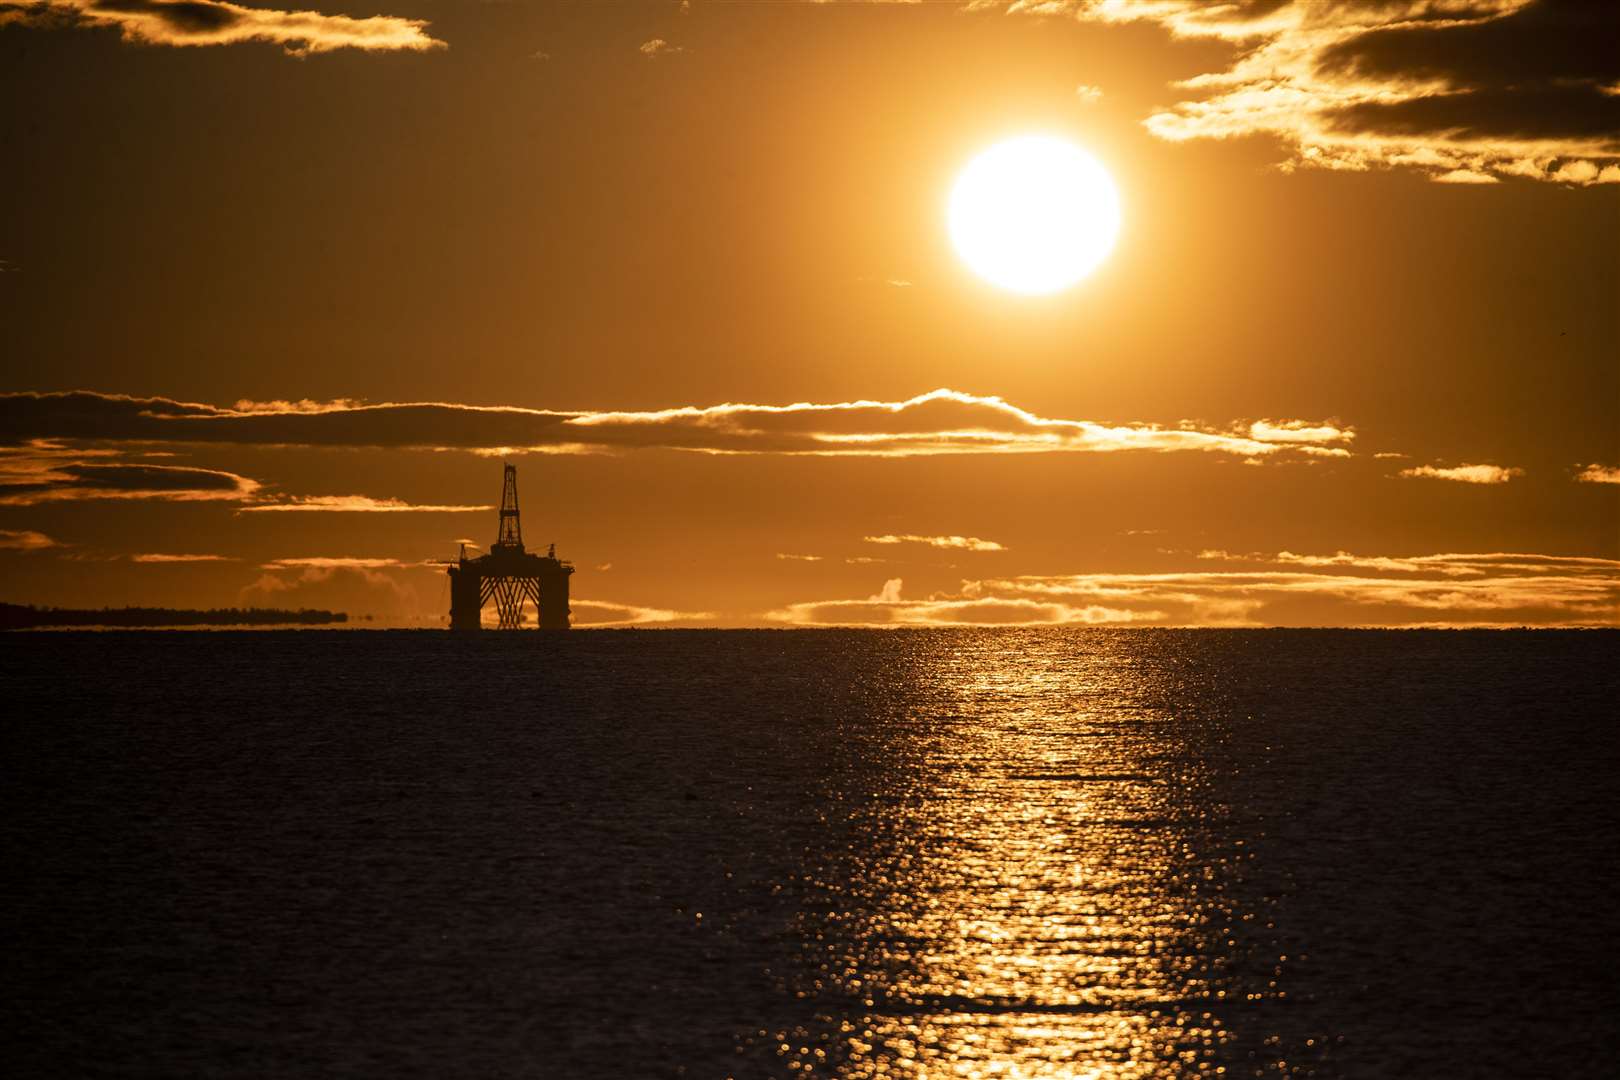 The Government has said it will issue new licences for oil and gas drilling in the North Sea (Jane Barlow/PA)